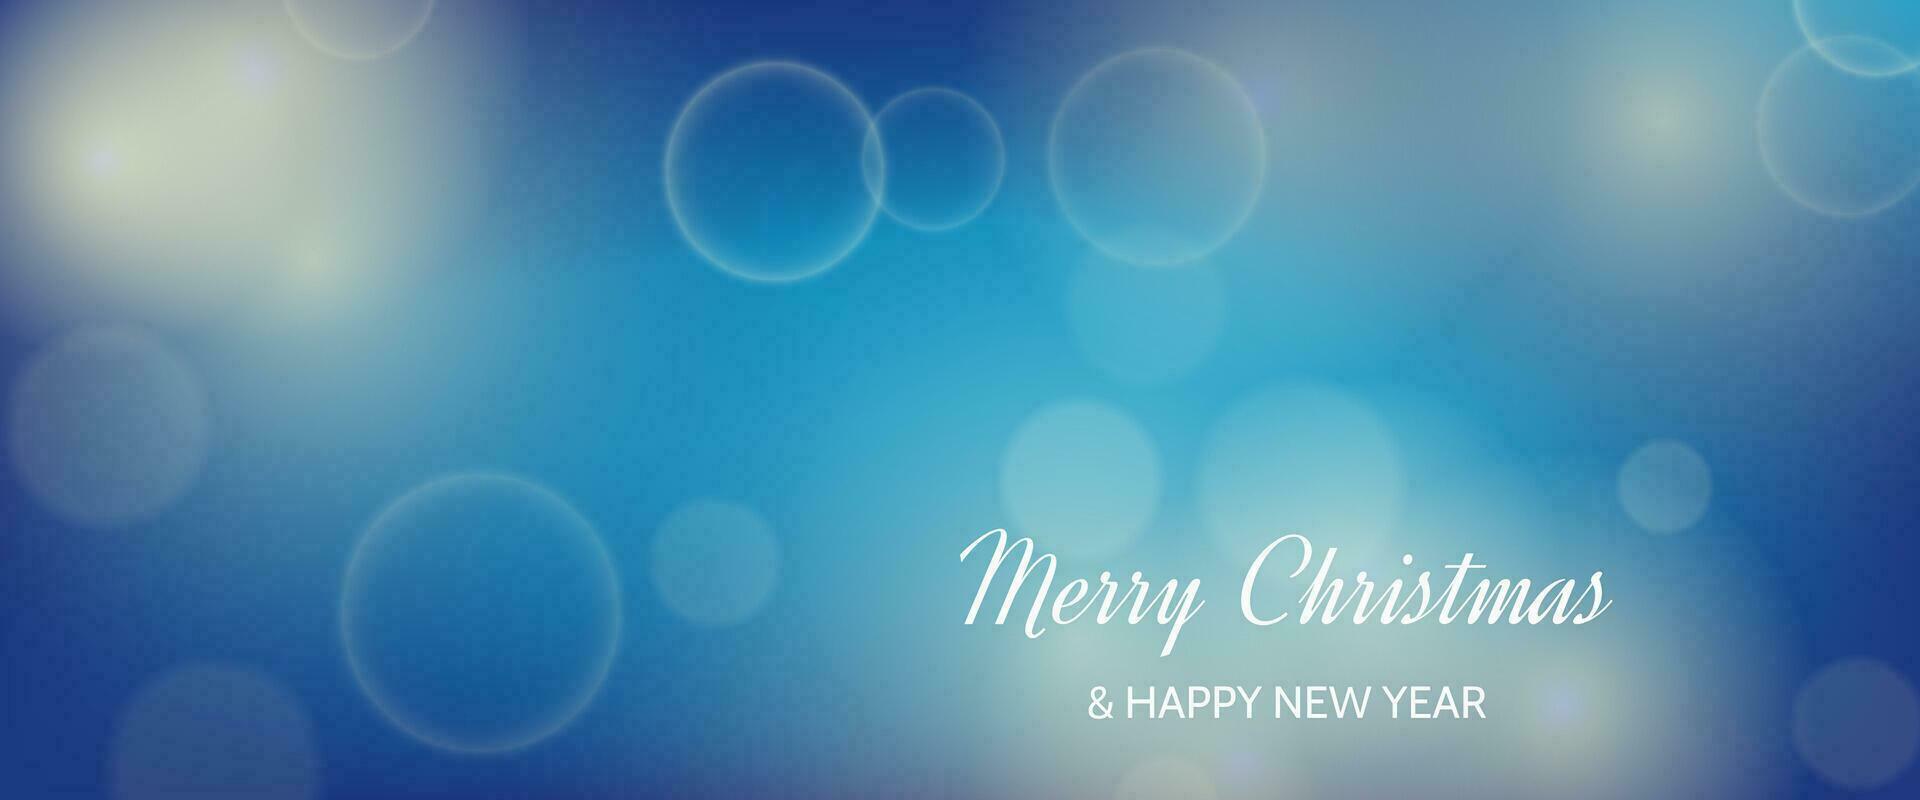 Bokeh background with New Year inscription vector